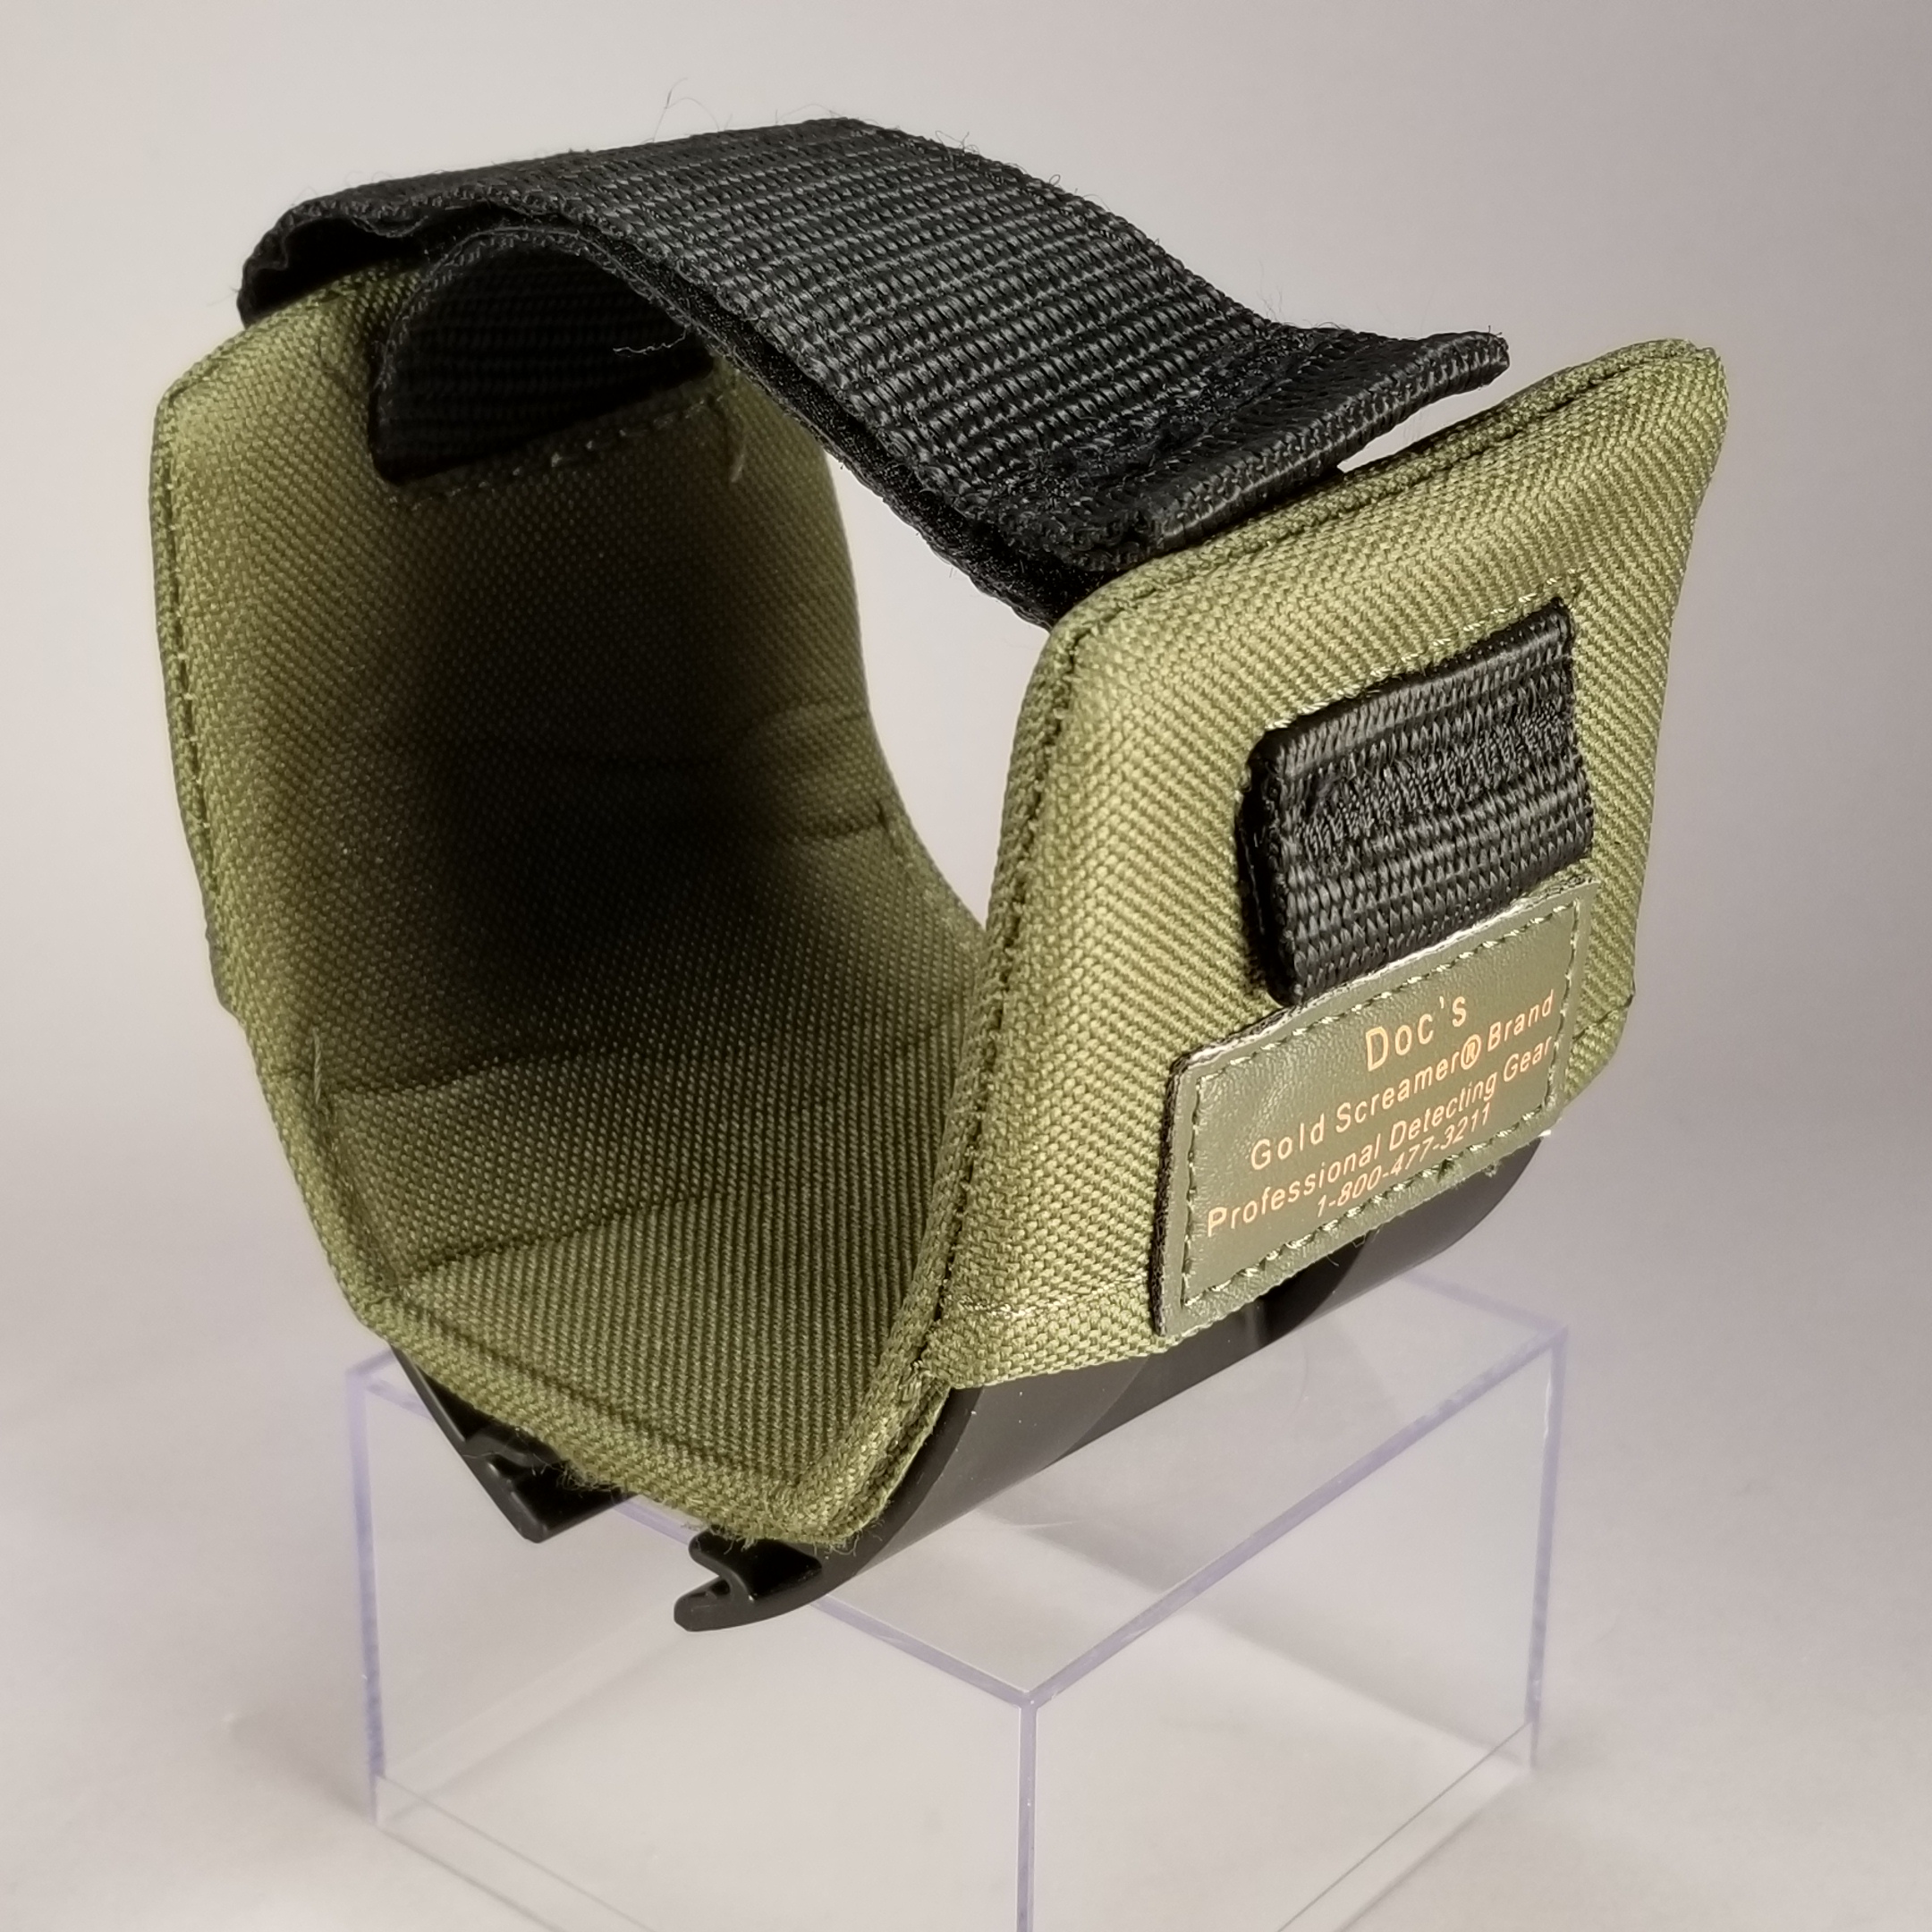 Doc's Padded Arm Cuff Cover for Minelab Gpz7000 or Ctx3030 With Strap for sale online 